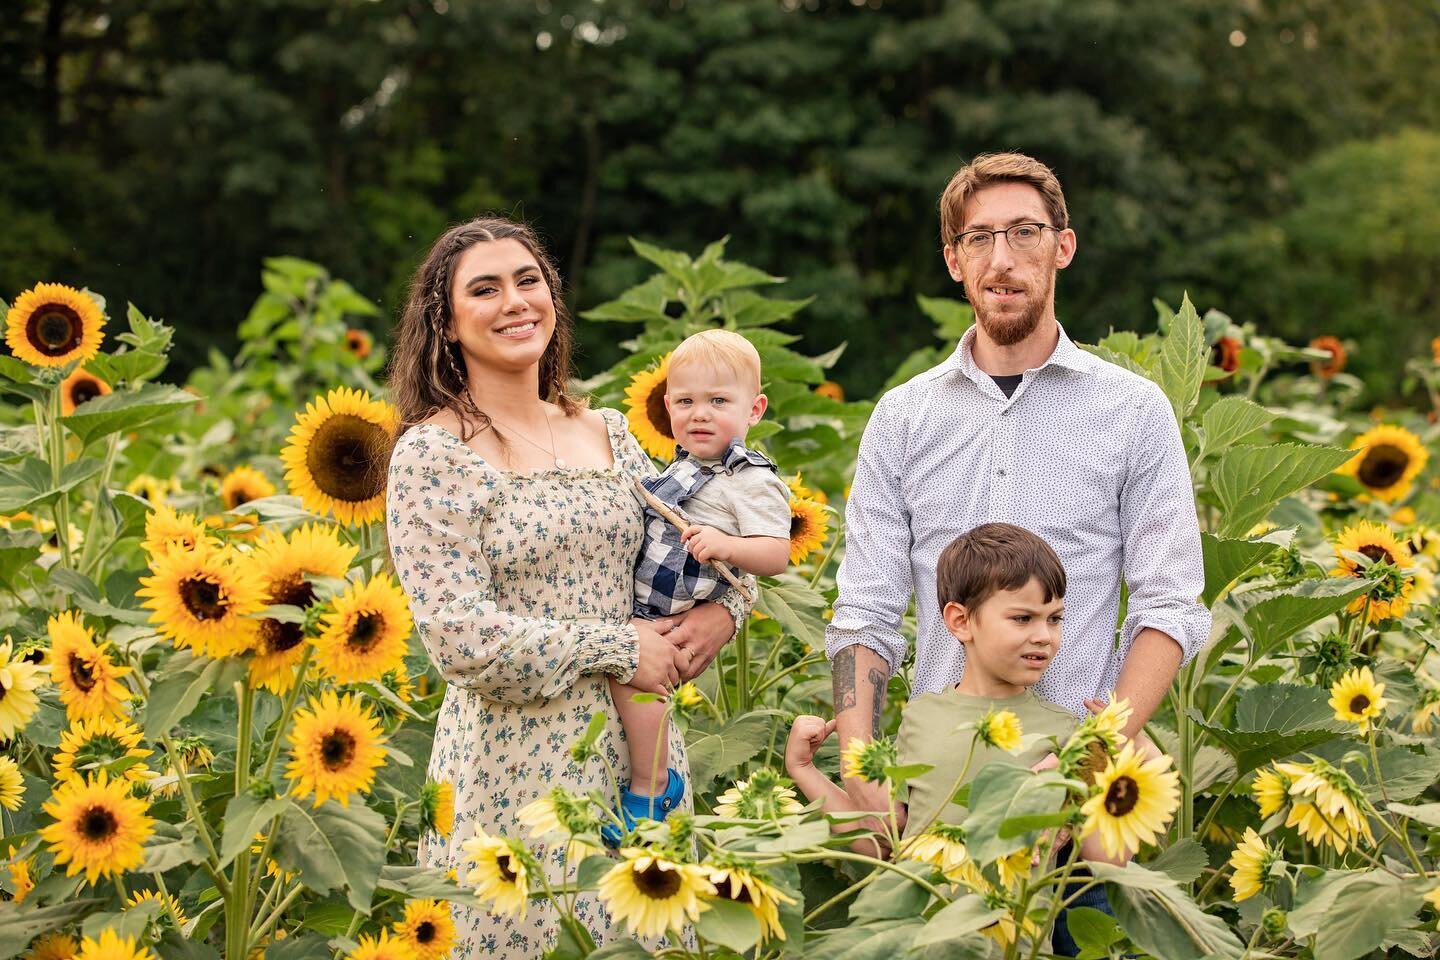 From our family sunflower 🌻 shoot with @ashleynizolekphotography the other day!!! I&rsquo;m obsessed!! 😍❤️&zwj;🔥 Thank you so much Ashley for capturing my chaotic but beautiful family ✨🌻 @libertyridgefarmweddings dress: @renttherunway